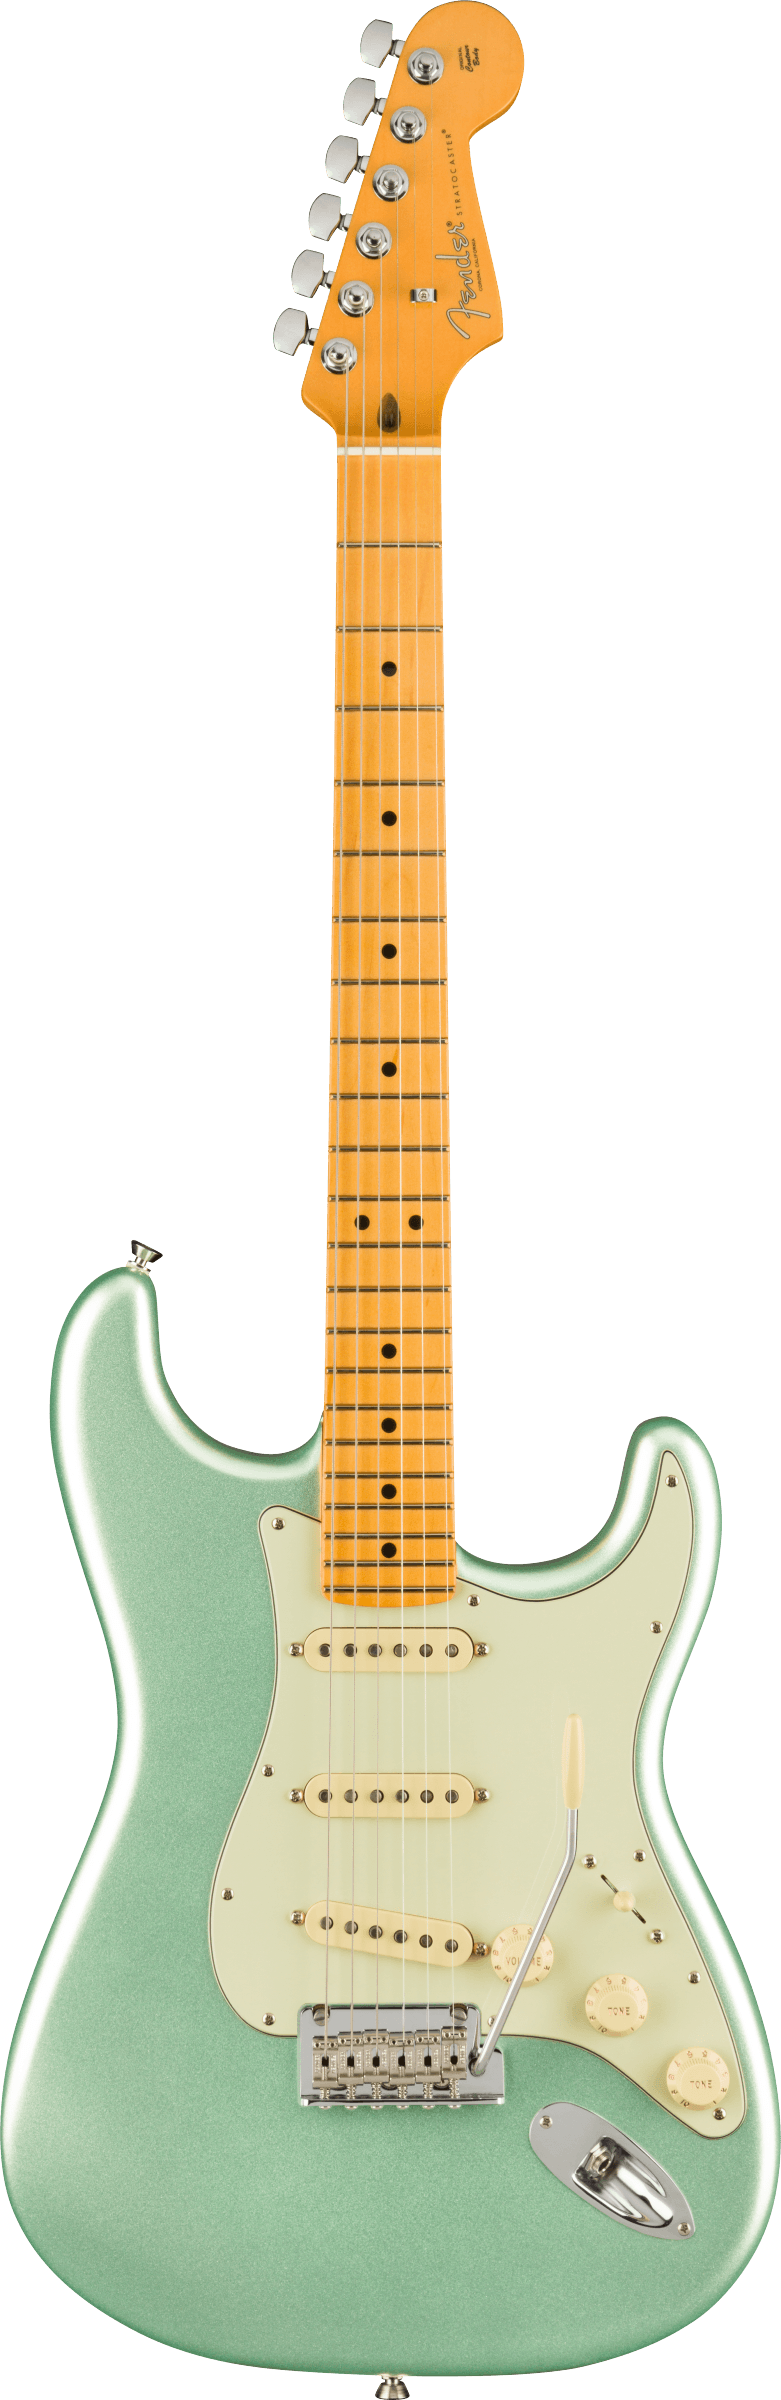 American Professional II Stratocaster Maple Fingerboard, Mystic Surf Green